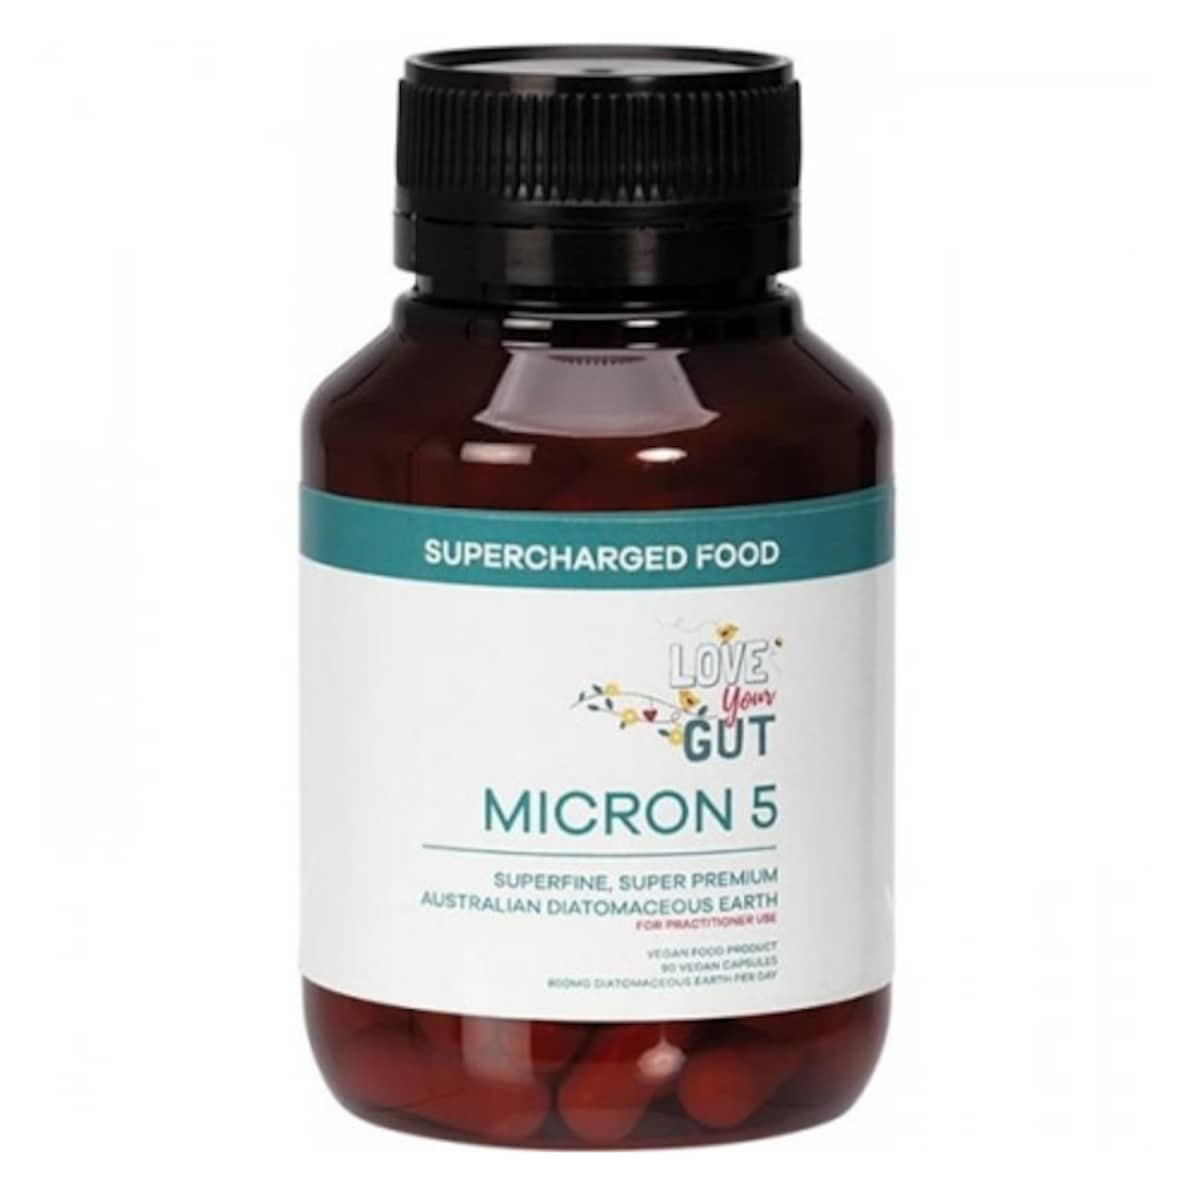 Supercharged Food Love Your Gut Capsules Micron 5 90 Pack